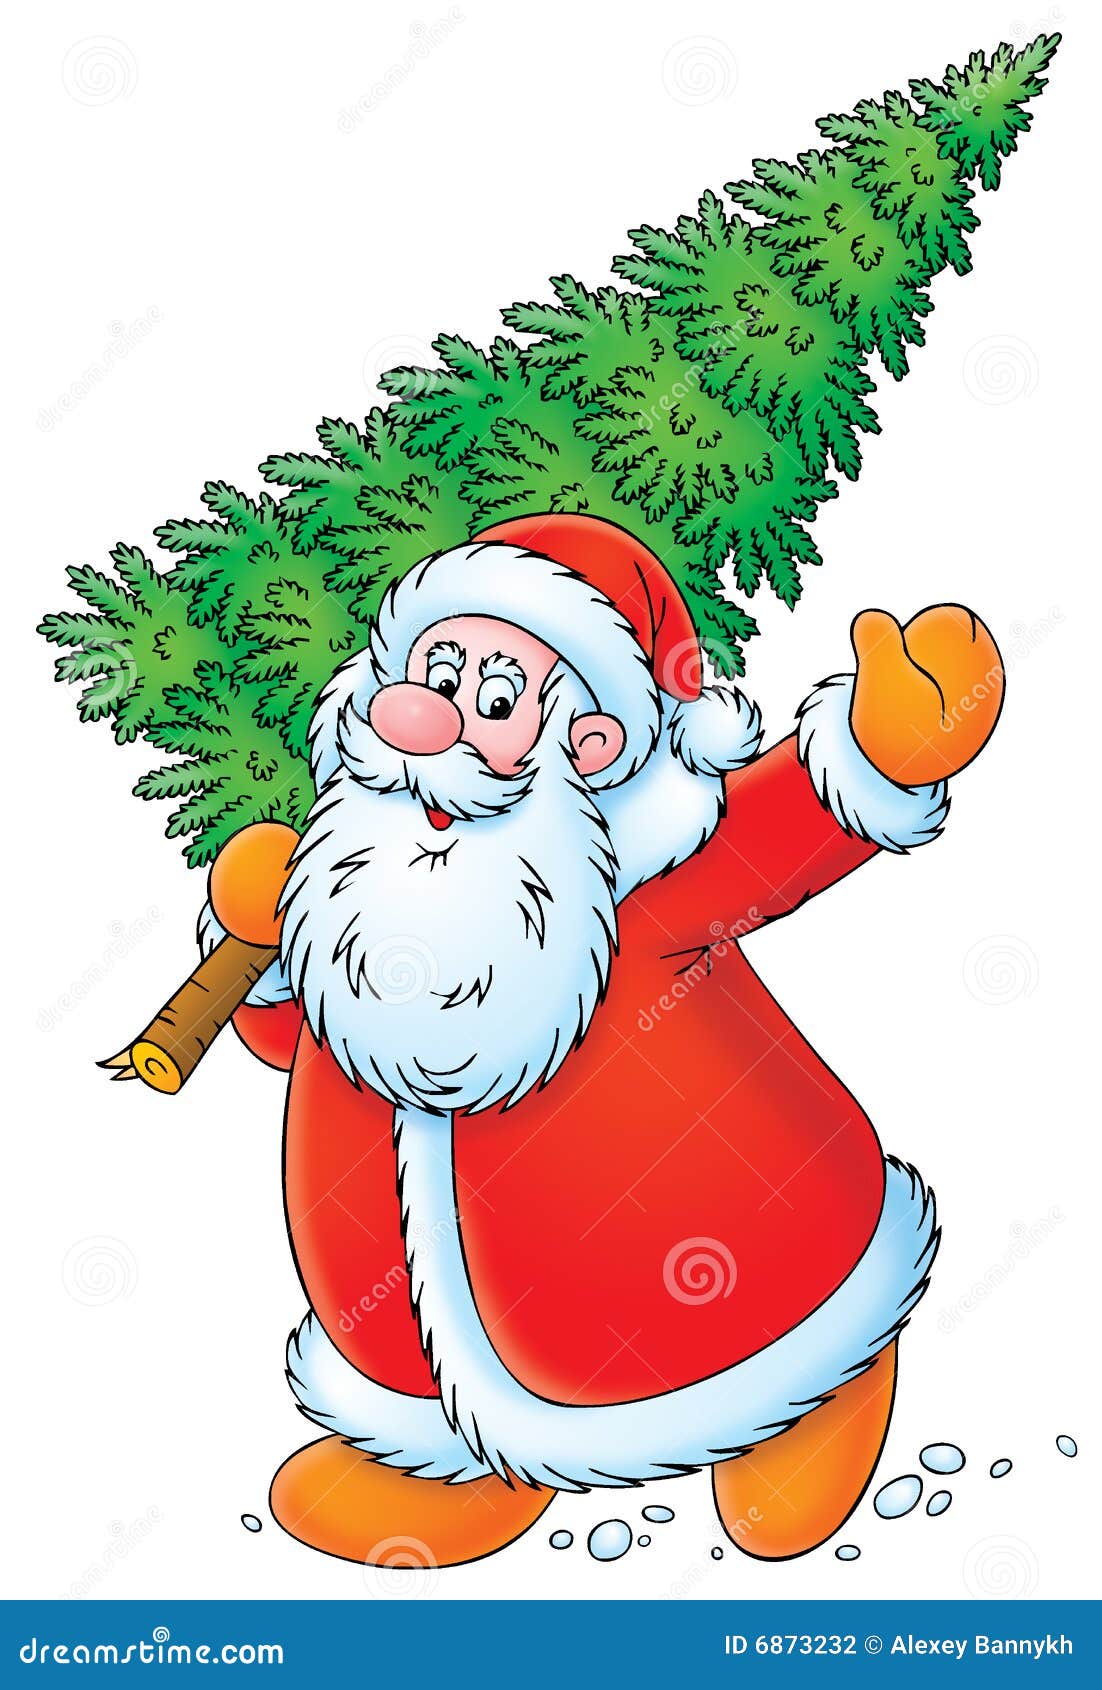 santa claus with christmas tree stock photography - image